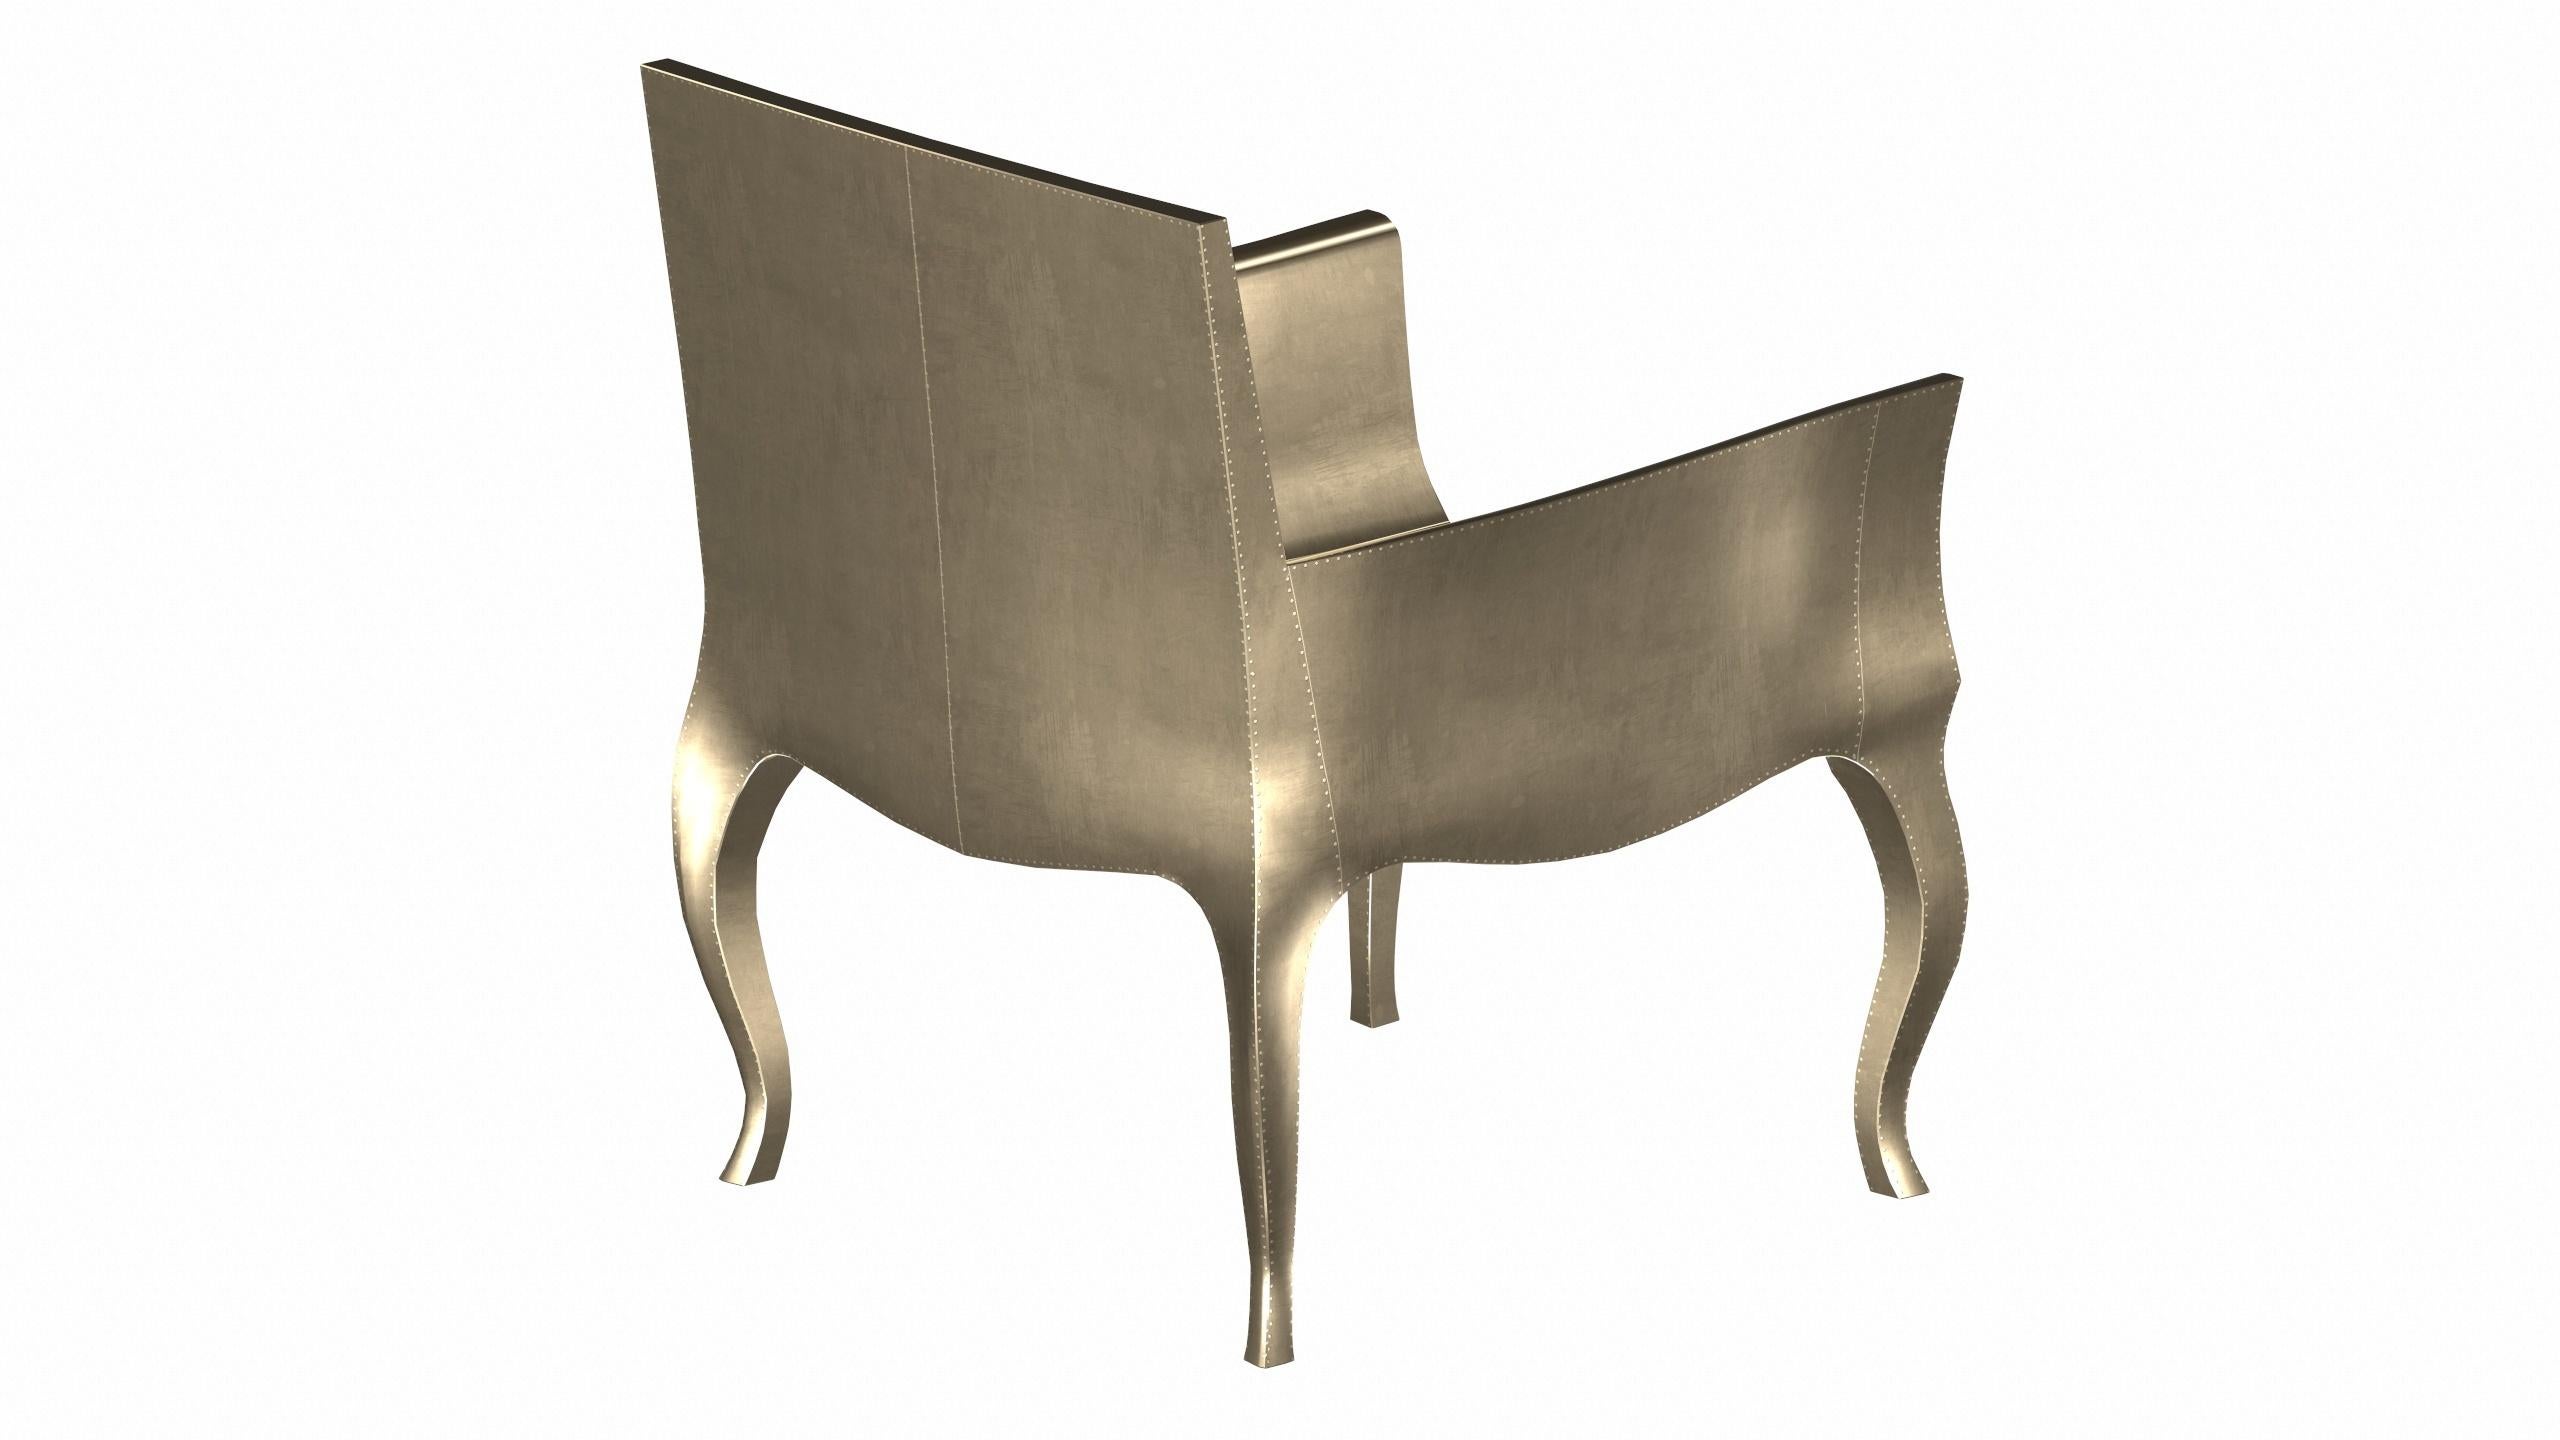 Art Deco Style Chairs in Smooth Brass by Paul Mathieu for S. Odegard For Sale 2